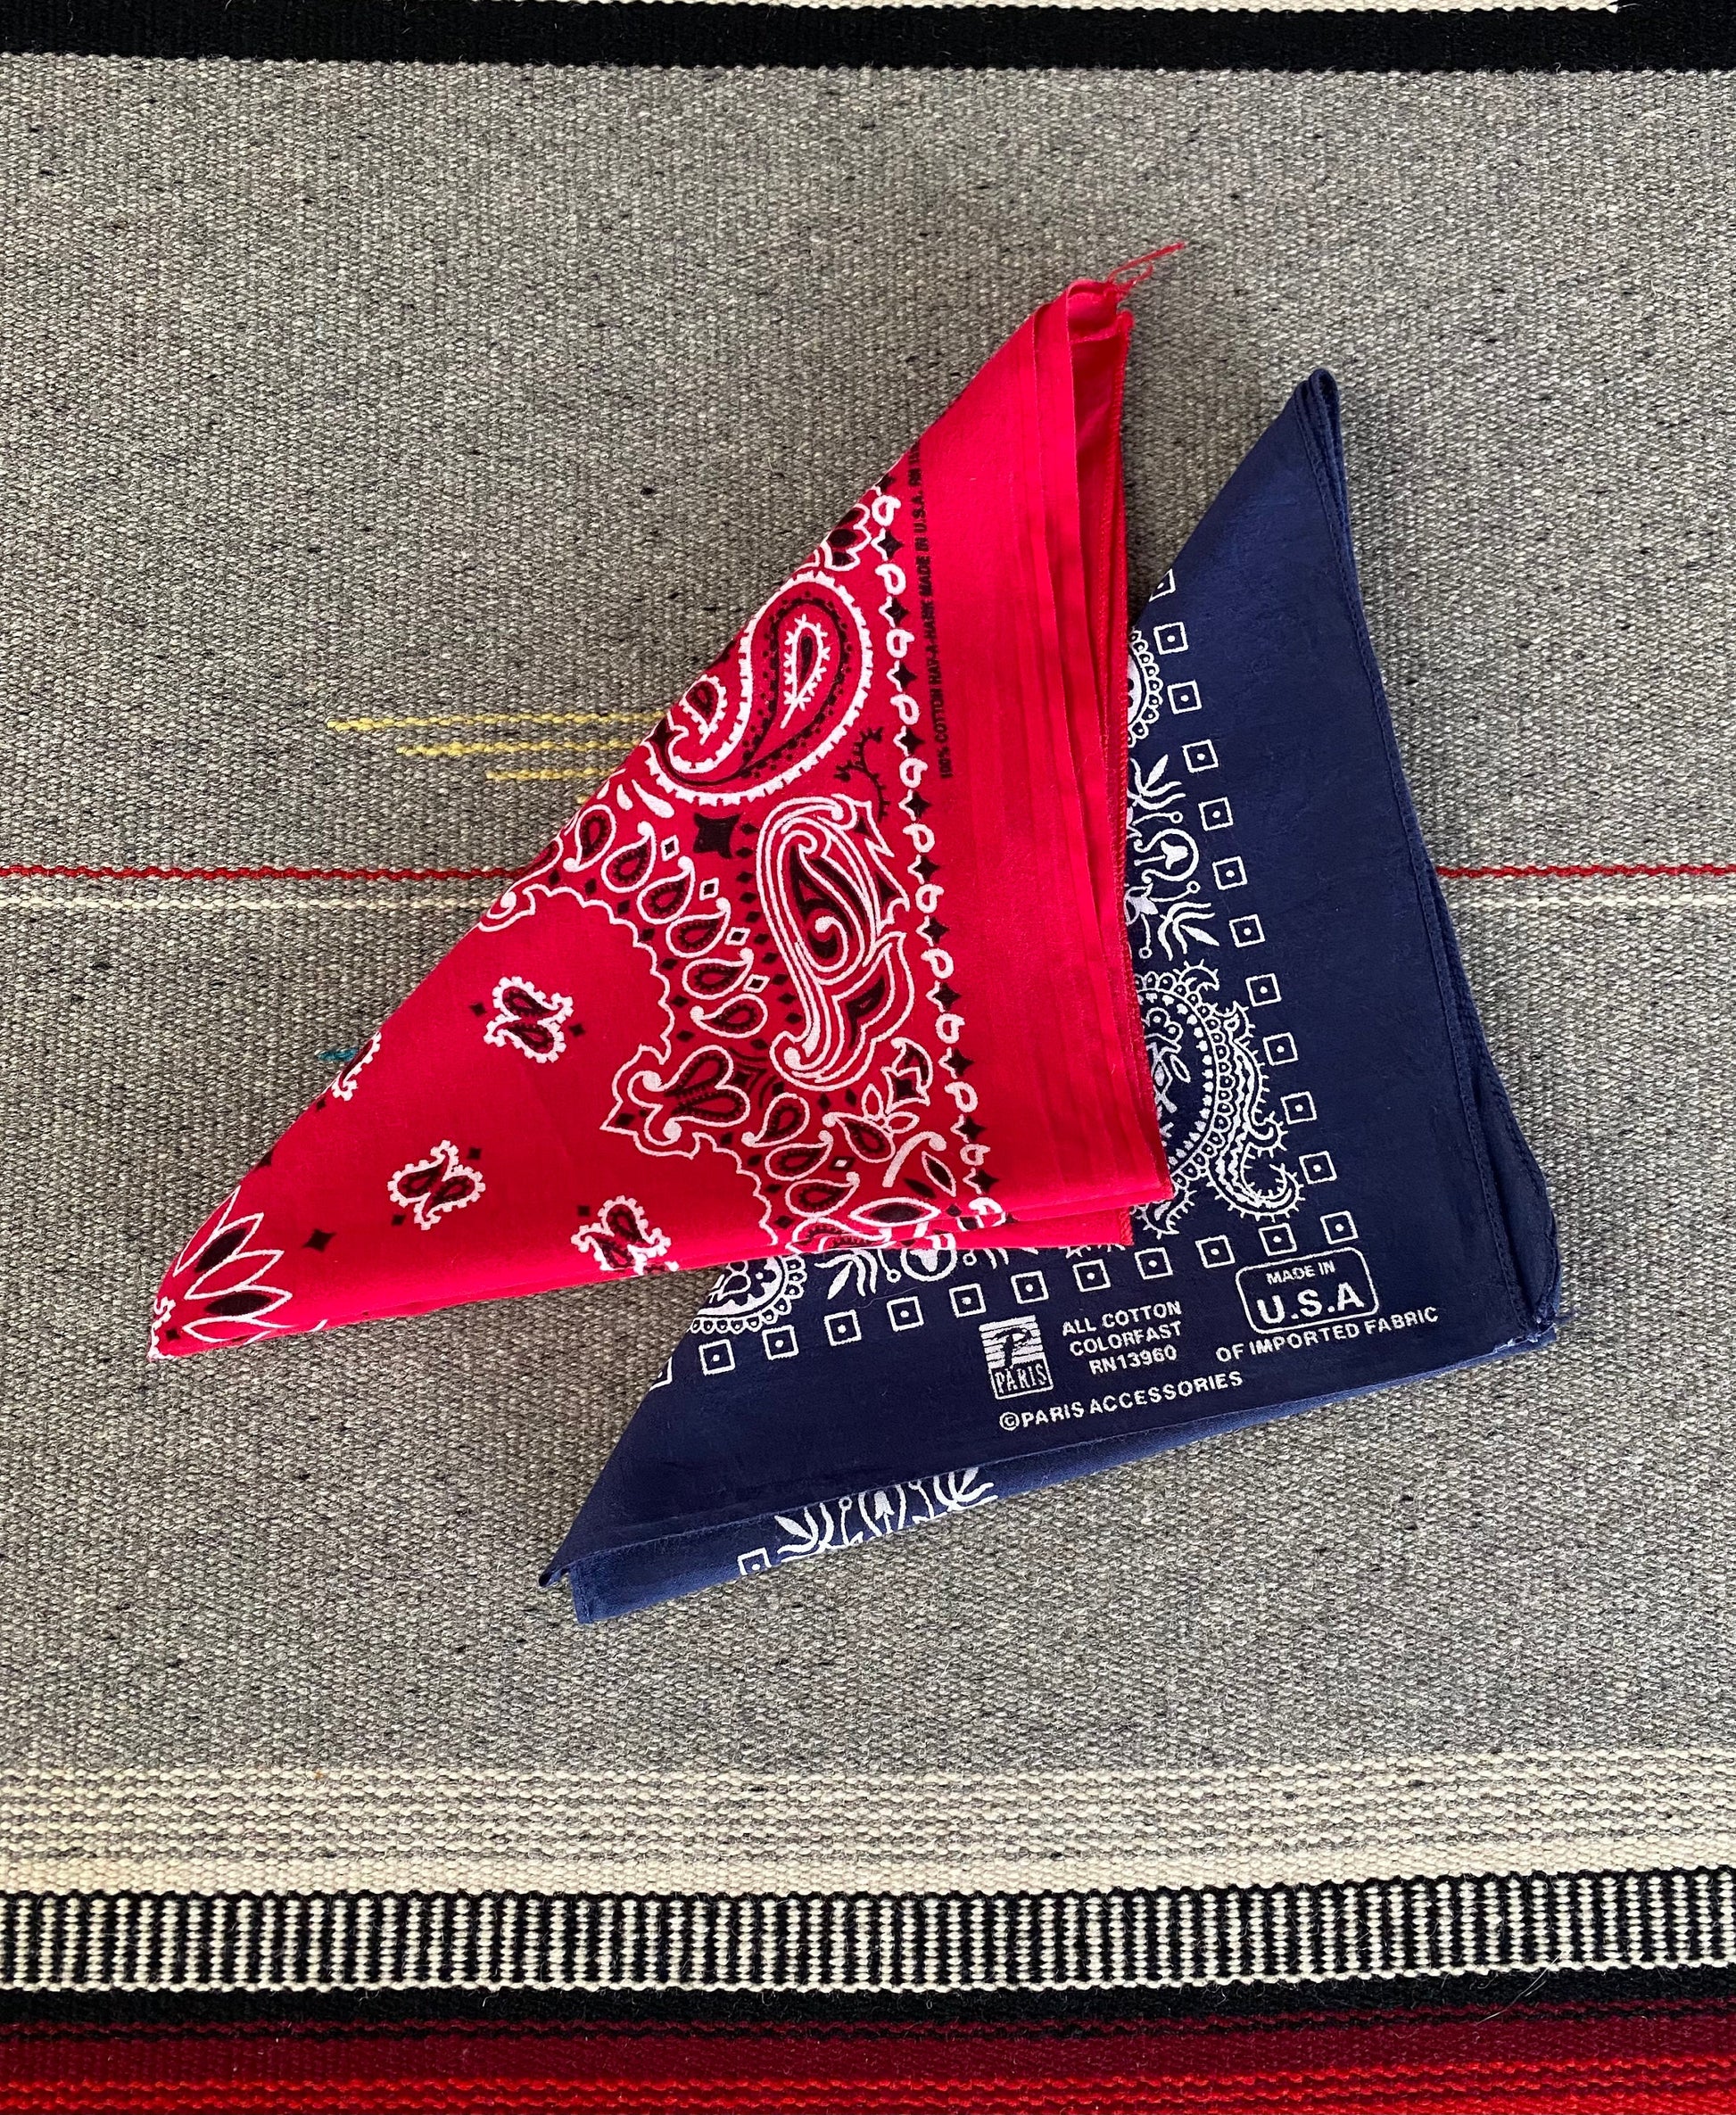 Authentic Vintage Bandanas Made in USA - Red & Blue Set | Premium Quality